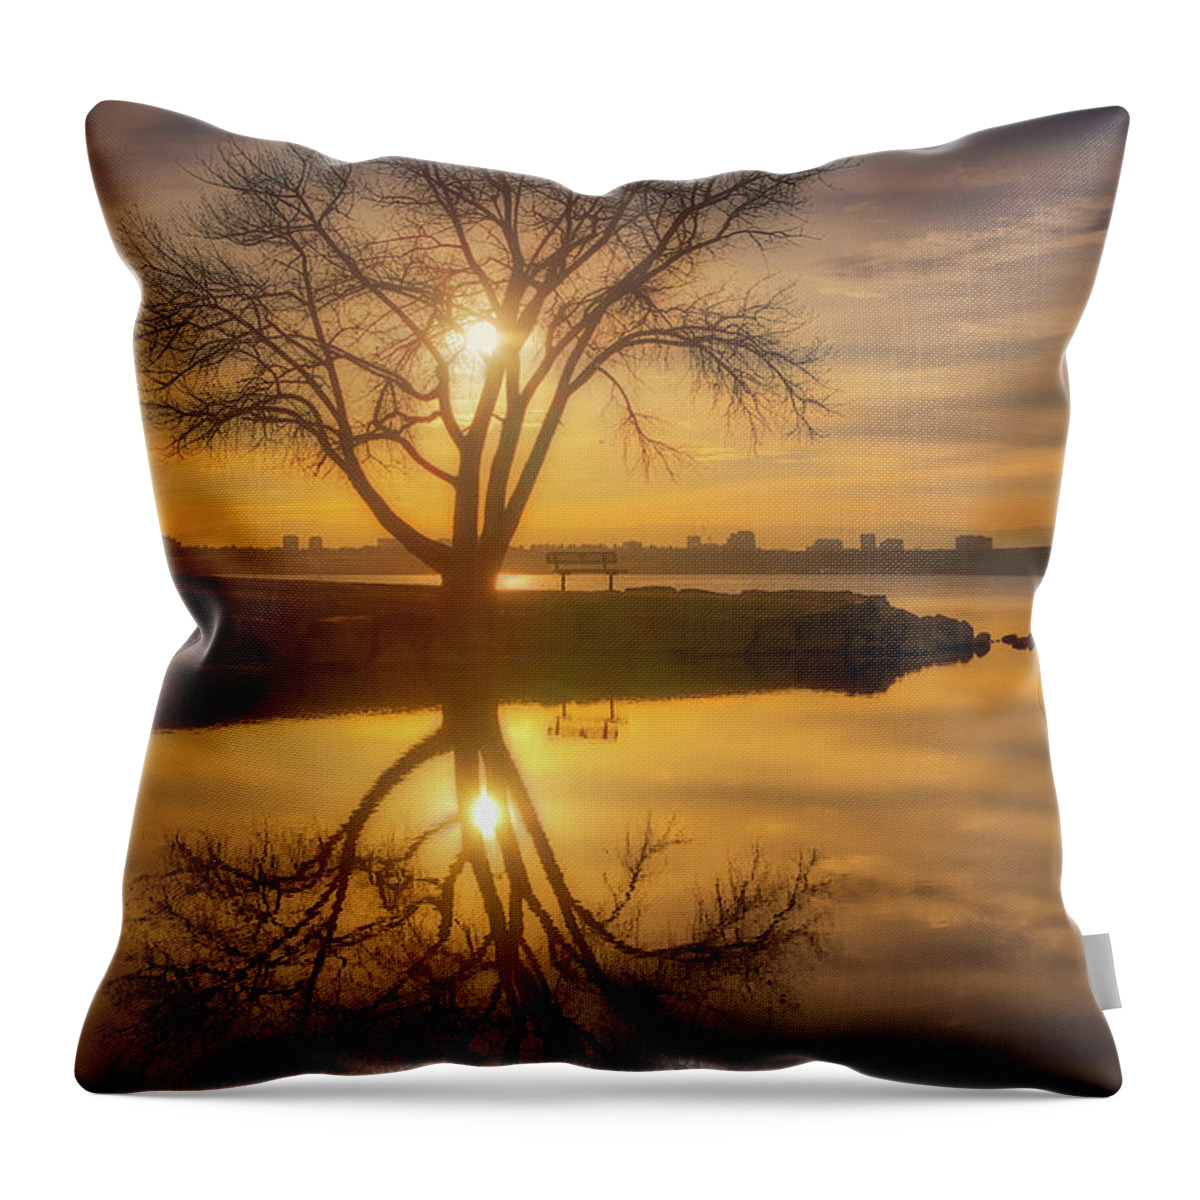 Trees Throw Pillow featuring the photograph Cherry Creek Sunset by Darren White